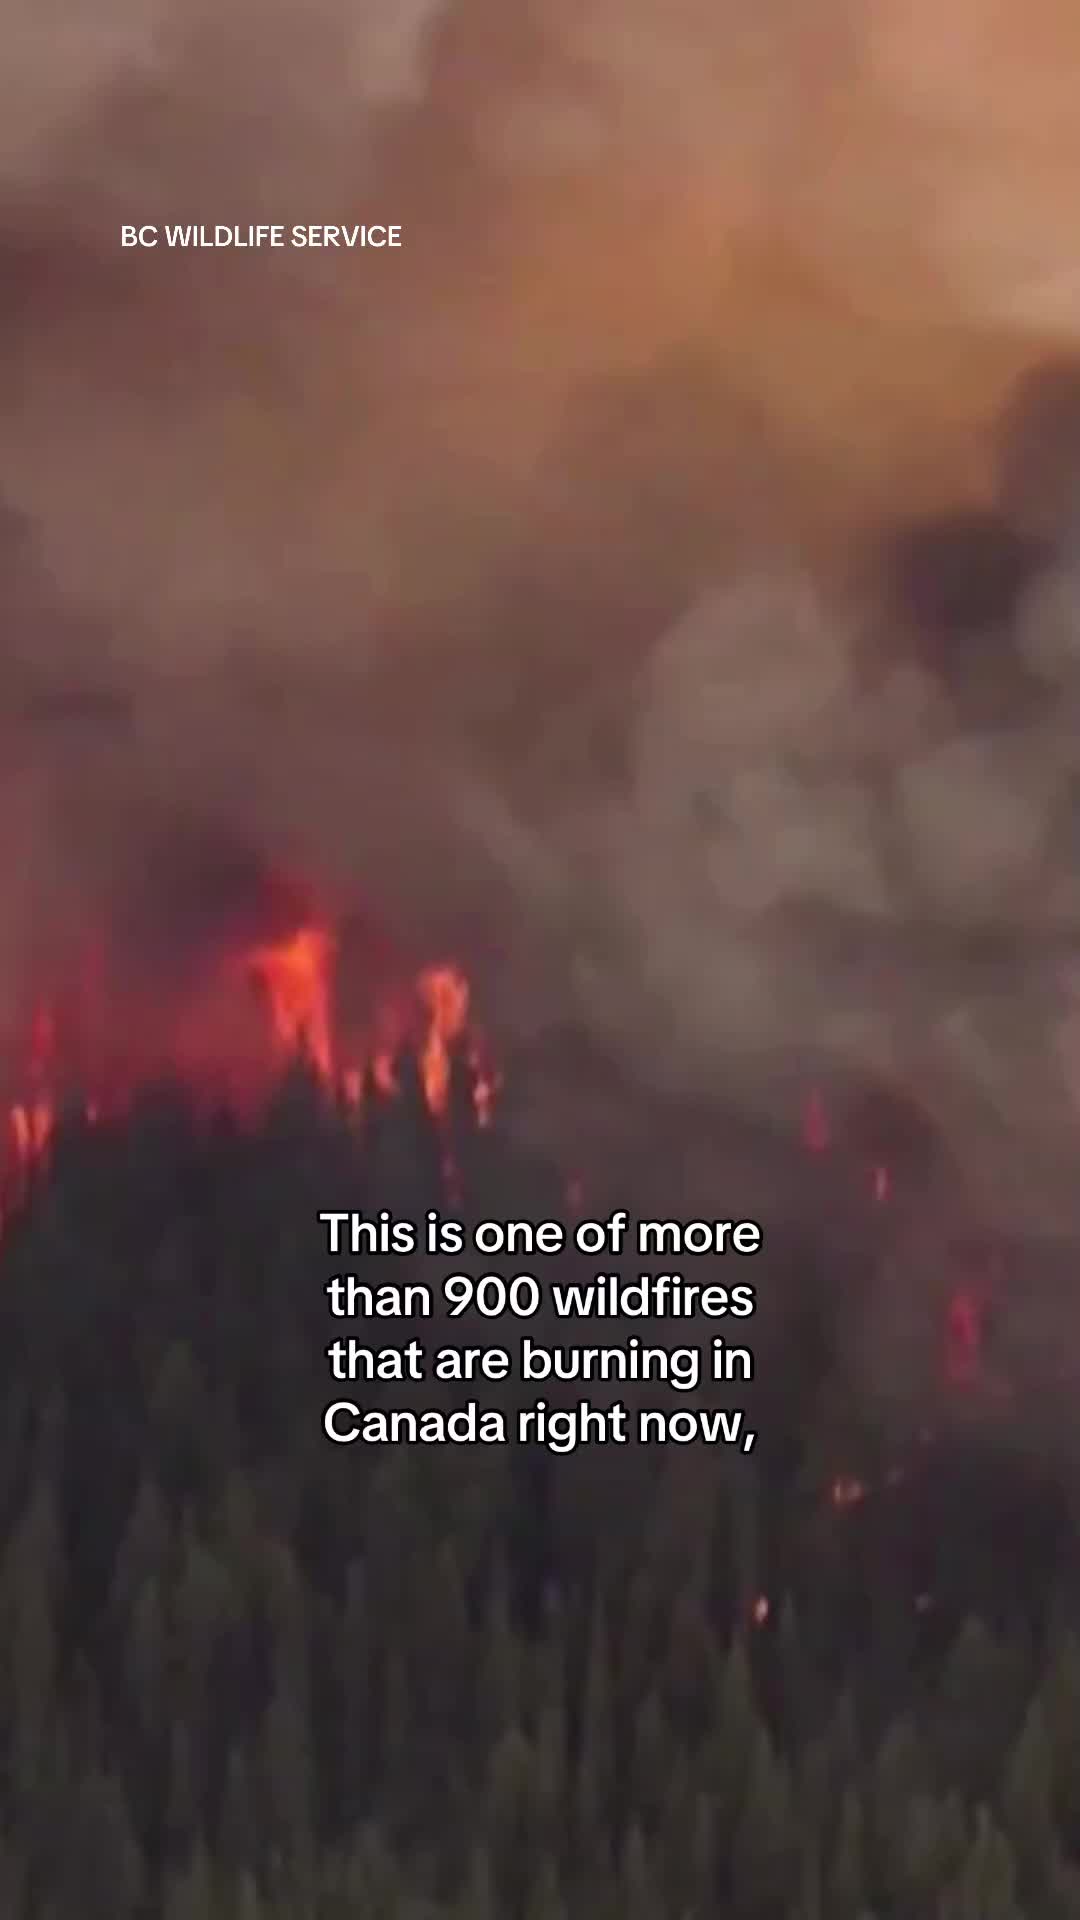 A fast-moving fire has ravaged the town of Jasper, Alberta in Canada, believed to have damaged 30-50% of structures. It is one of more than 900 wildfires currently burning across Canada. #news #wildfires #canada #jasper #alberta